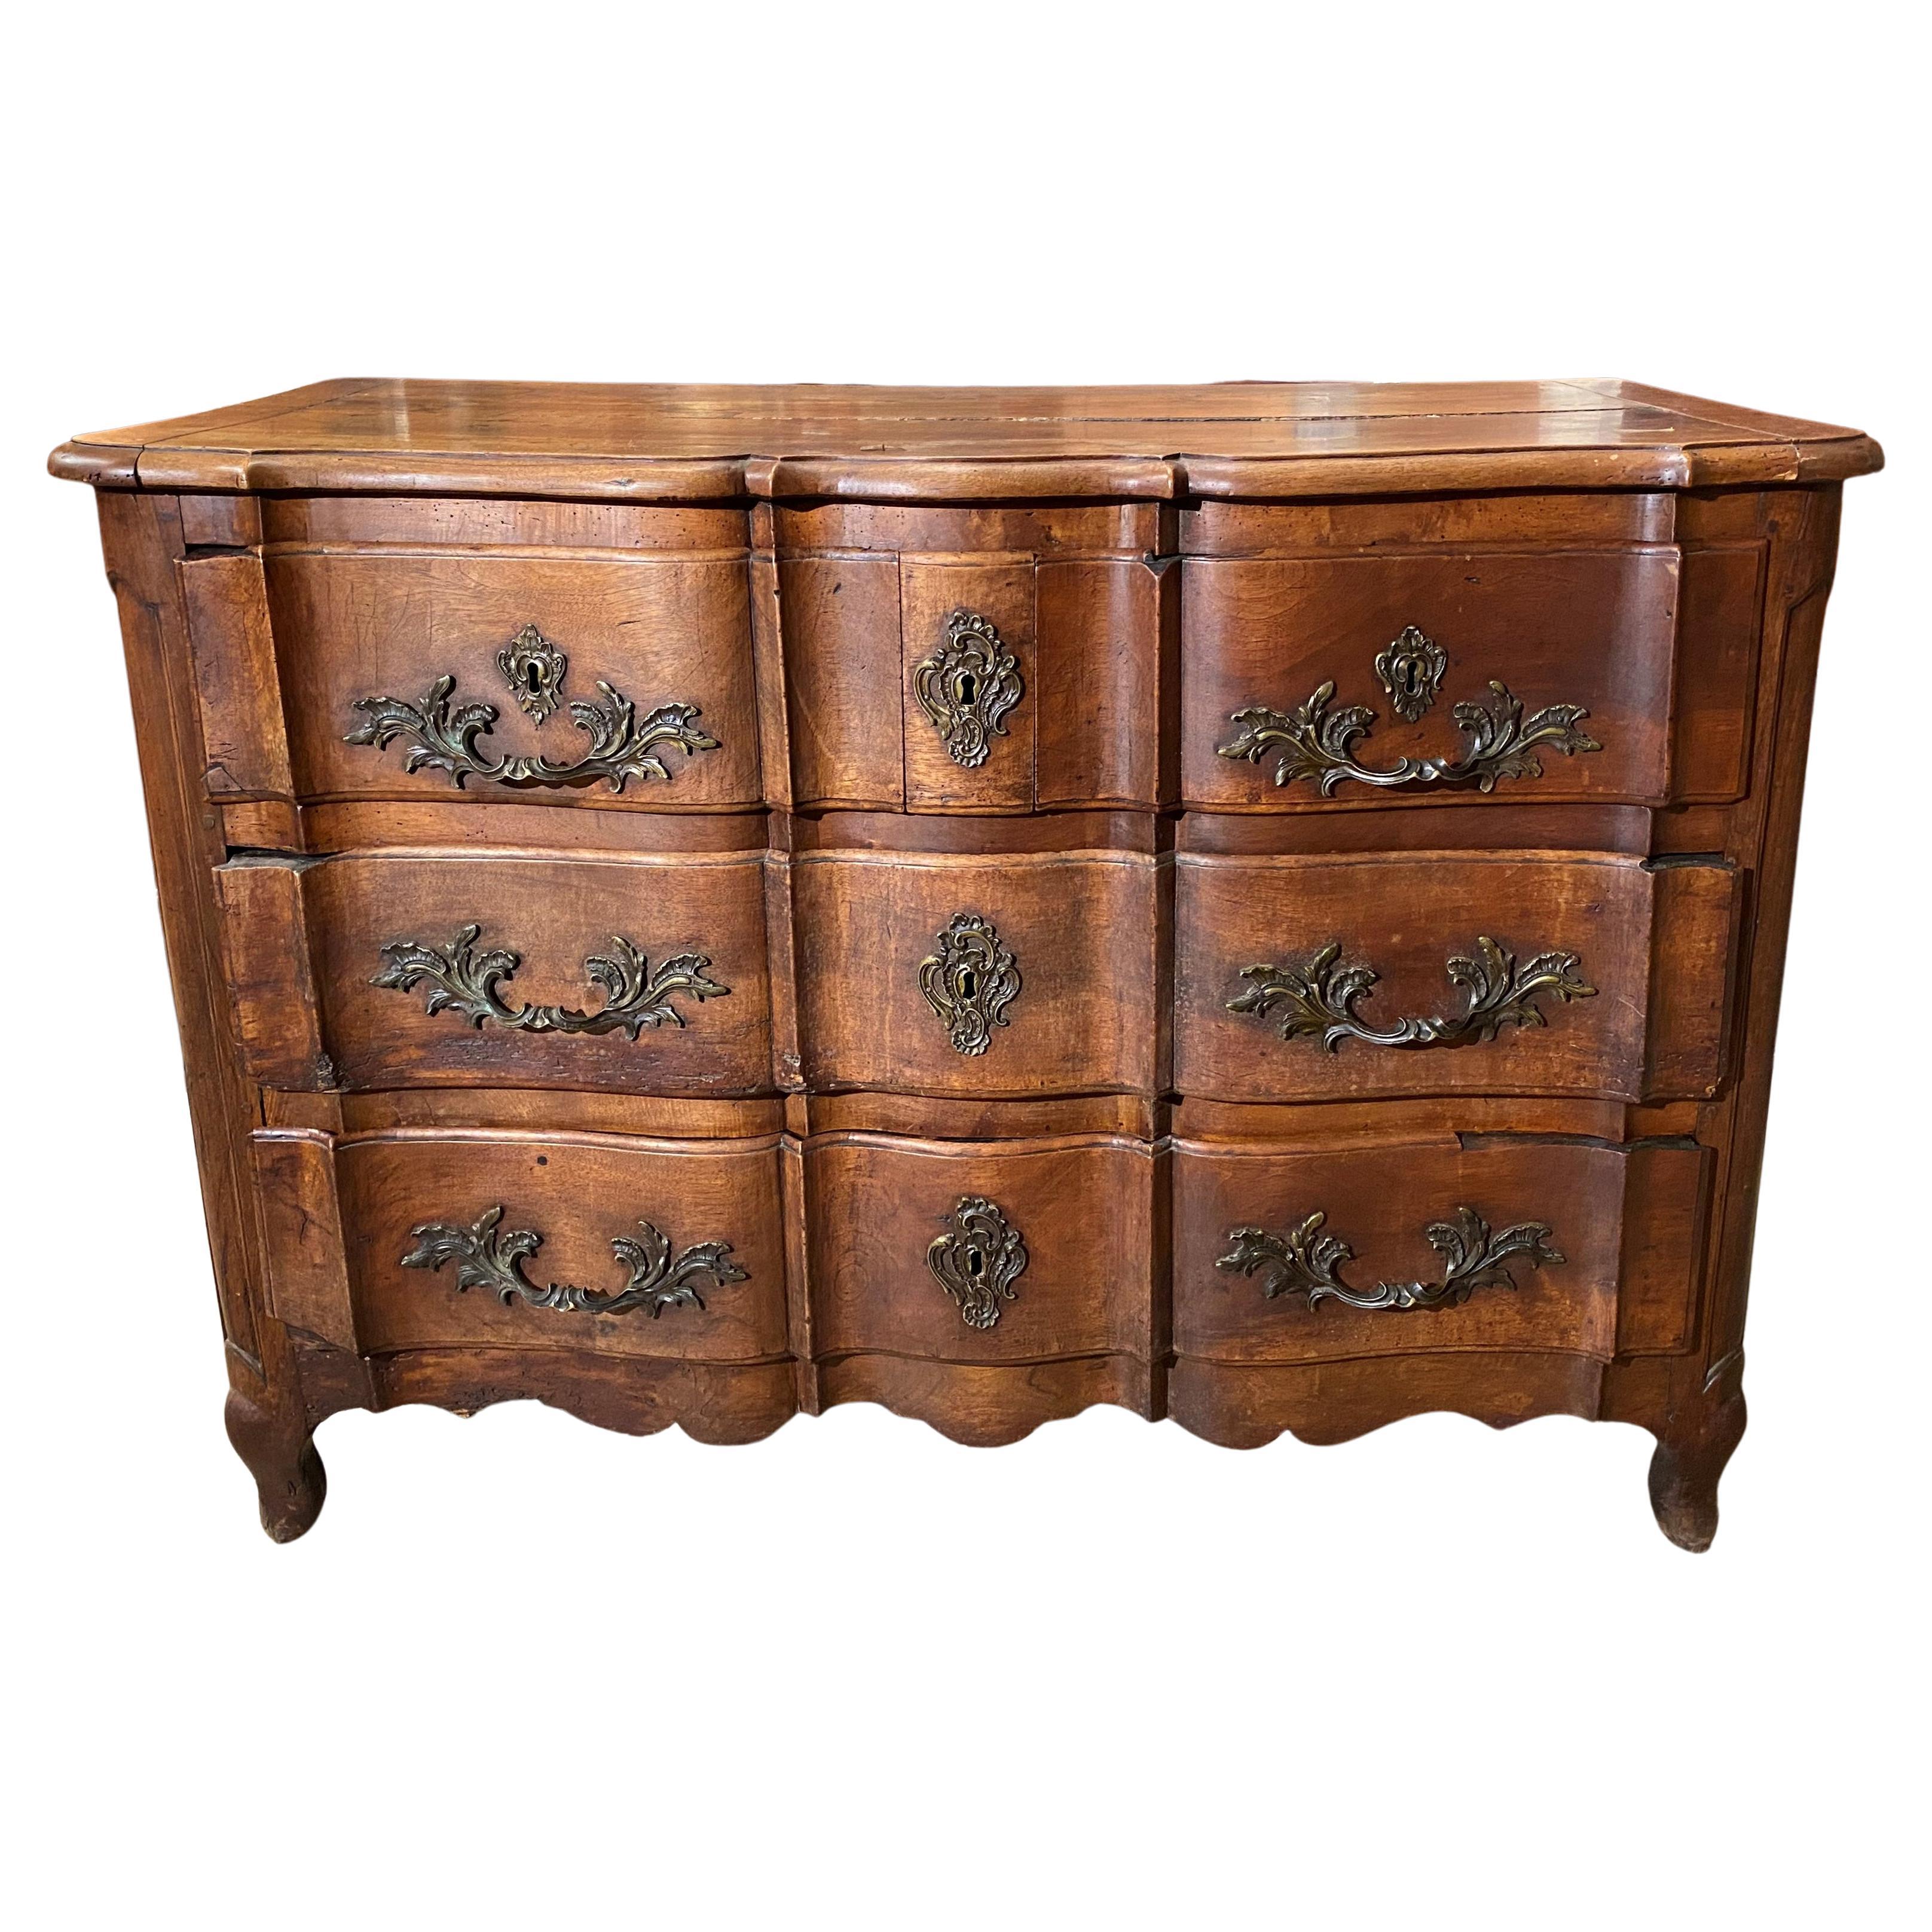 18th C French Provincial Five Drawer Walnut Commode with Serpentine Front